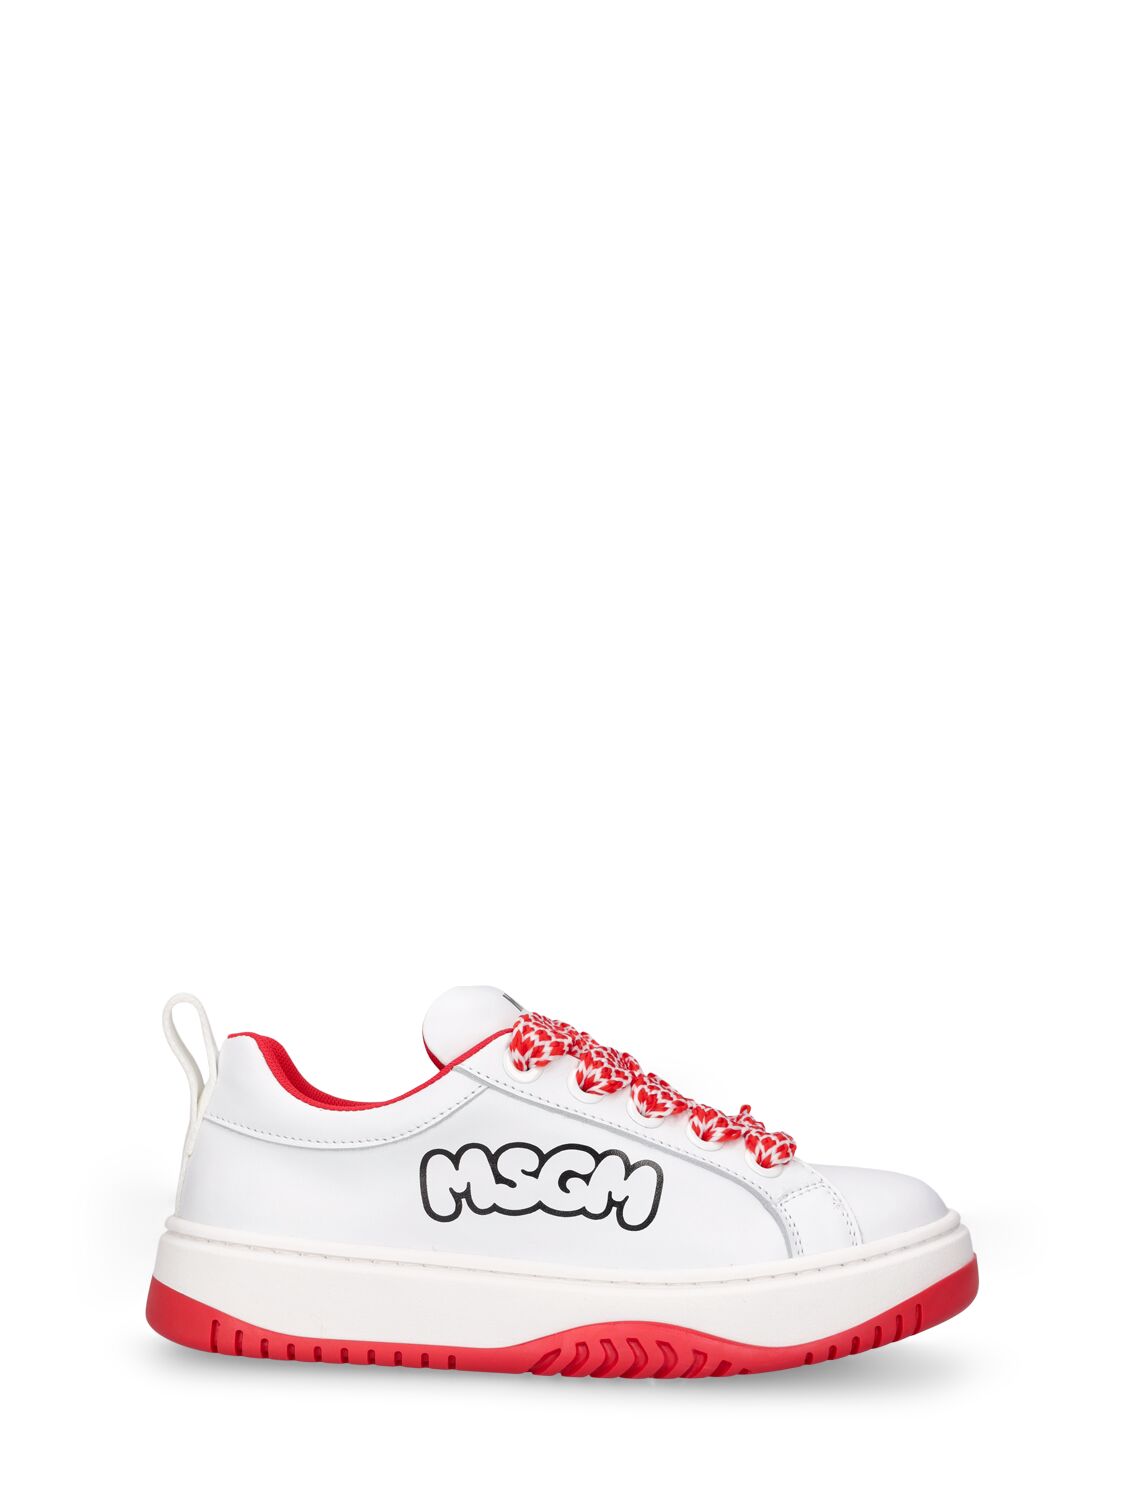 Msgm Kids' Logo Print Leather Lace-up Sneakers In White,red